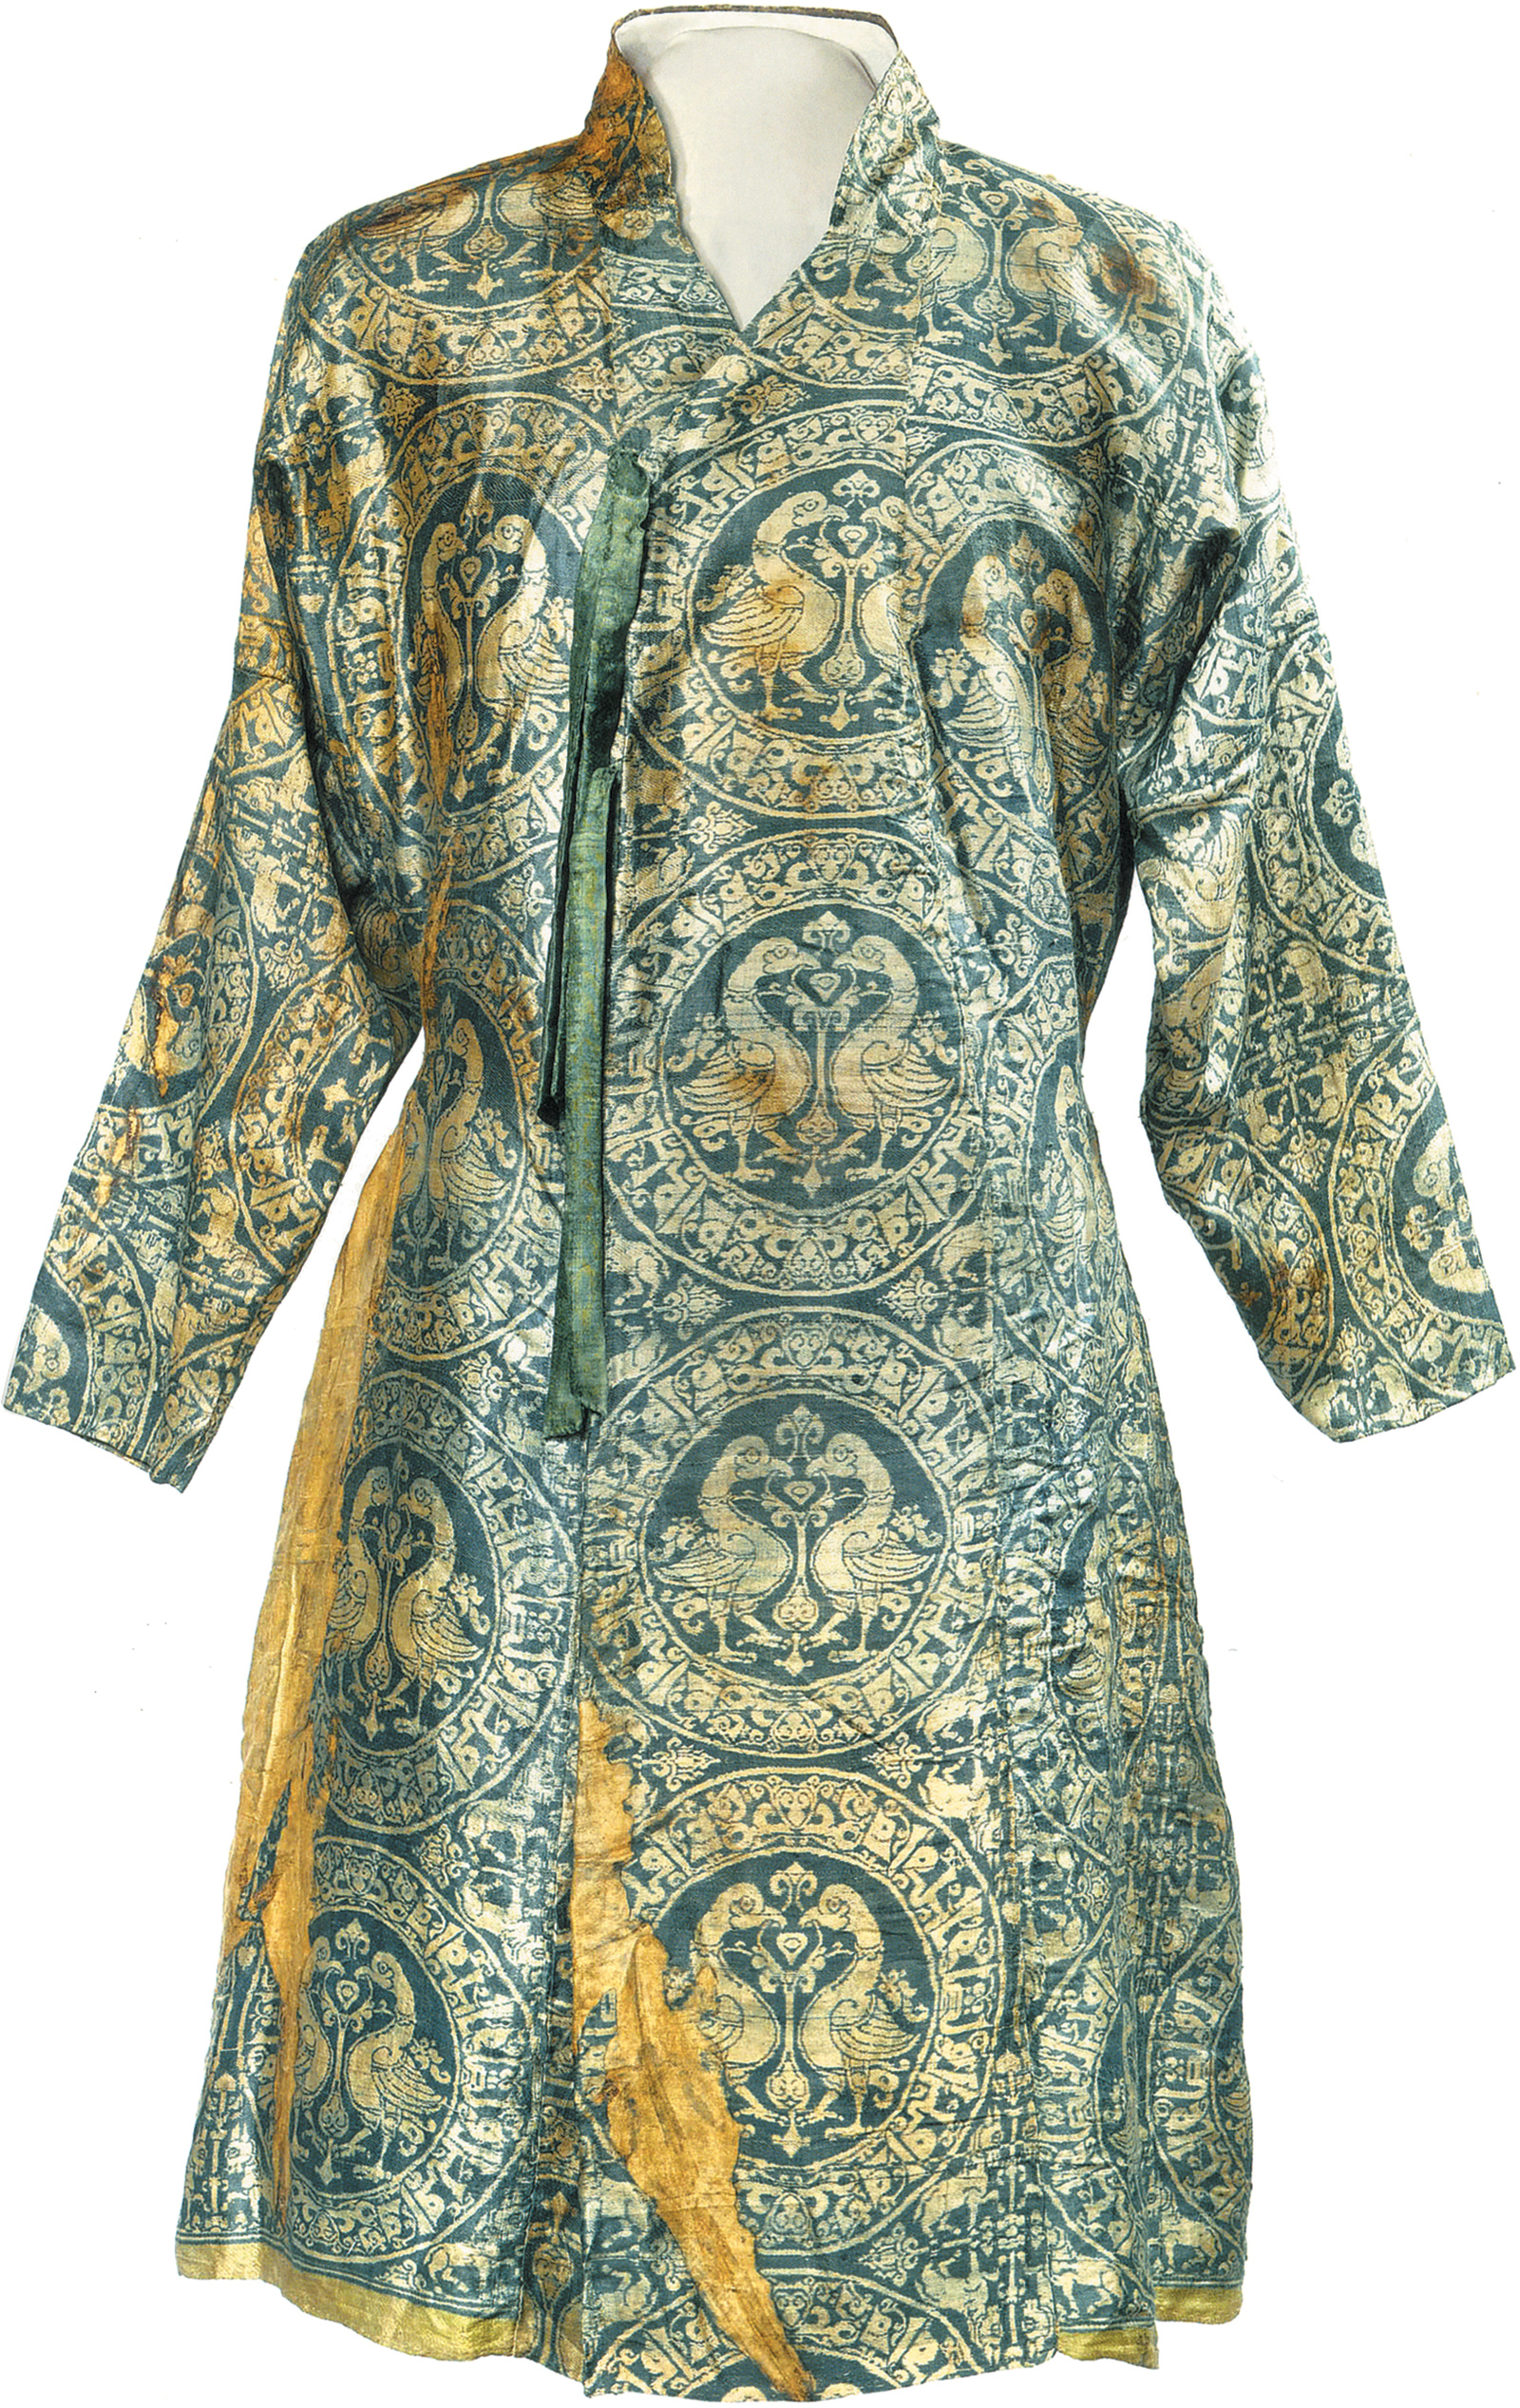 A silk robe with ‘Glory, prosperity, and victory’ written in Arabic around each pair of birds, Iran, eleventh­–twelfth century